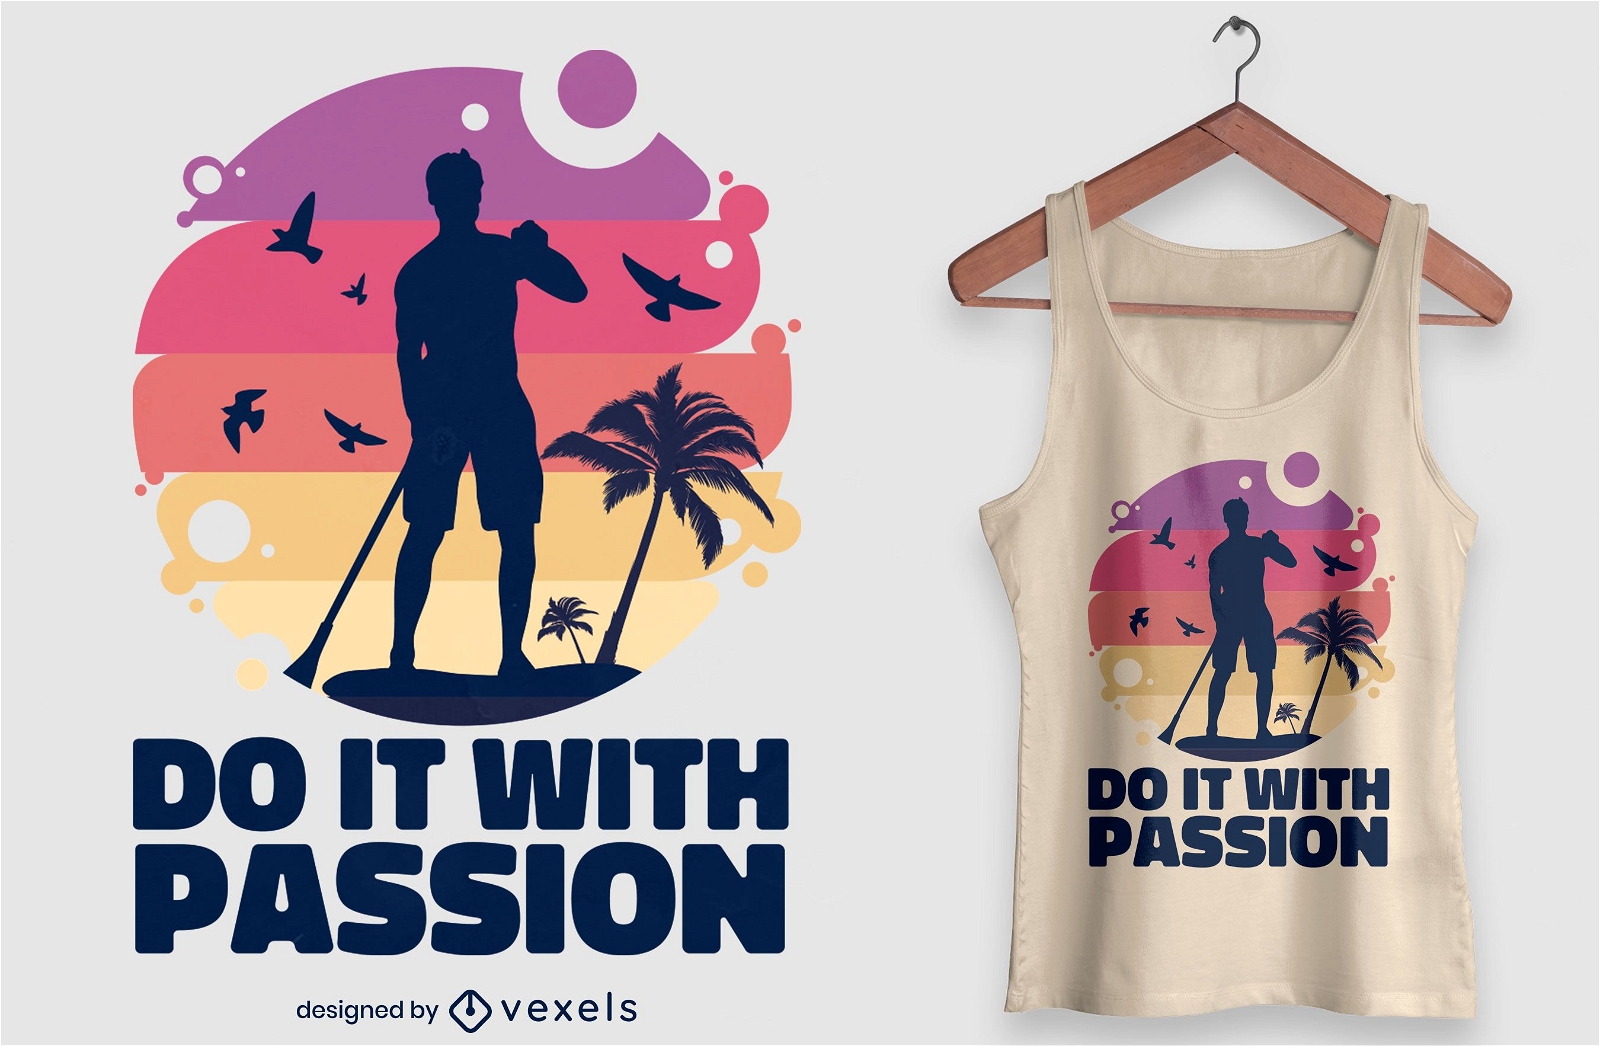 Do it with passion t-shirt design